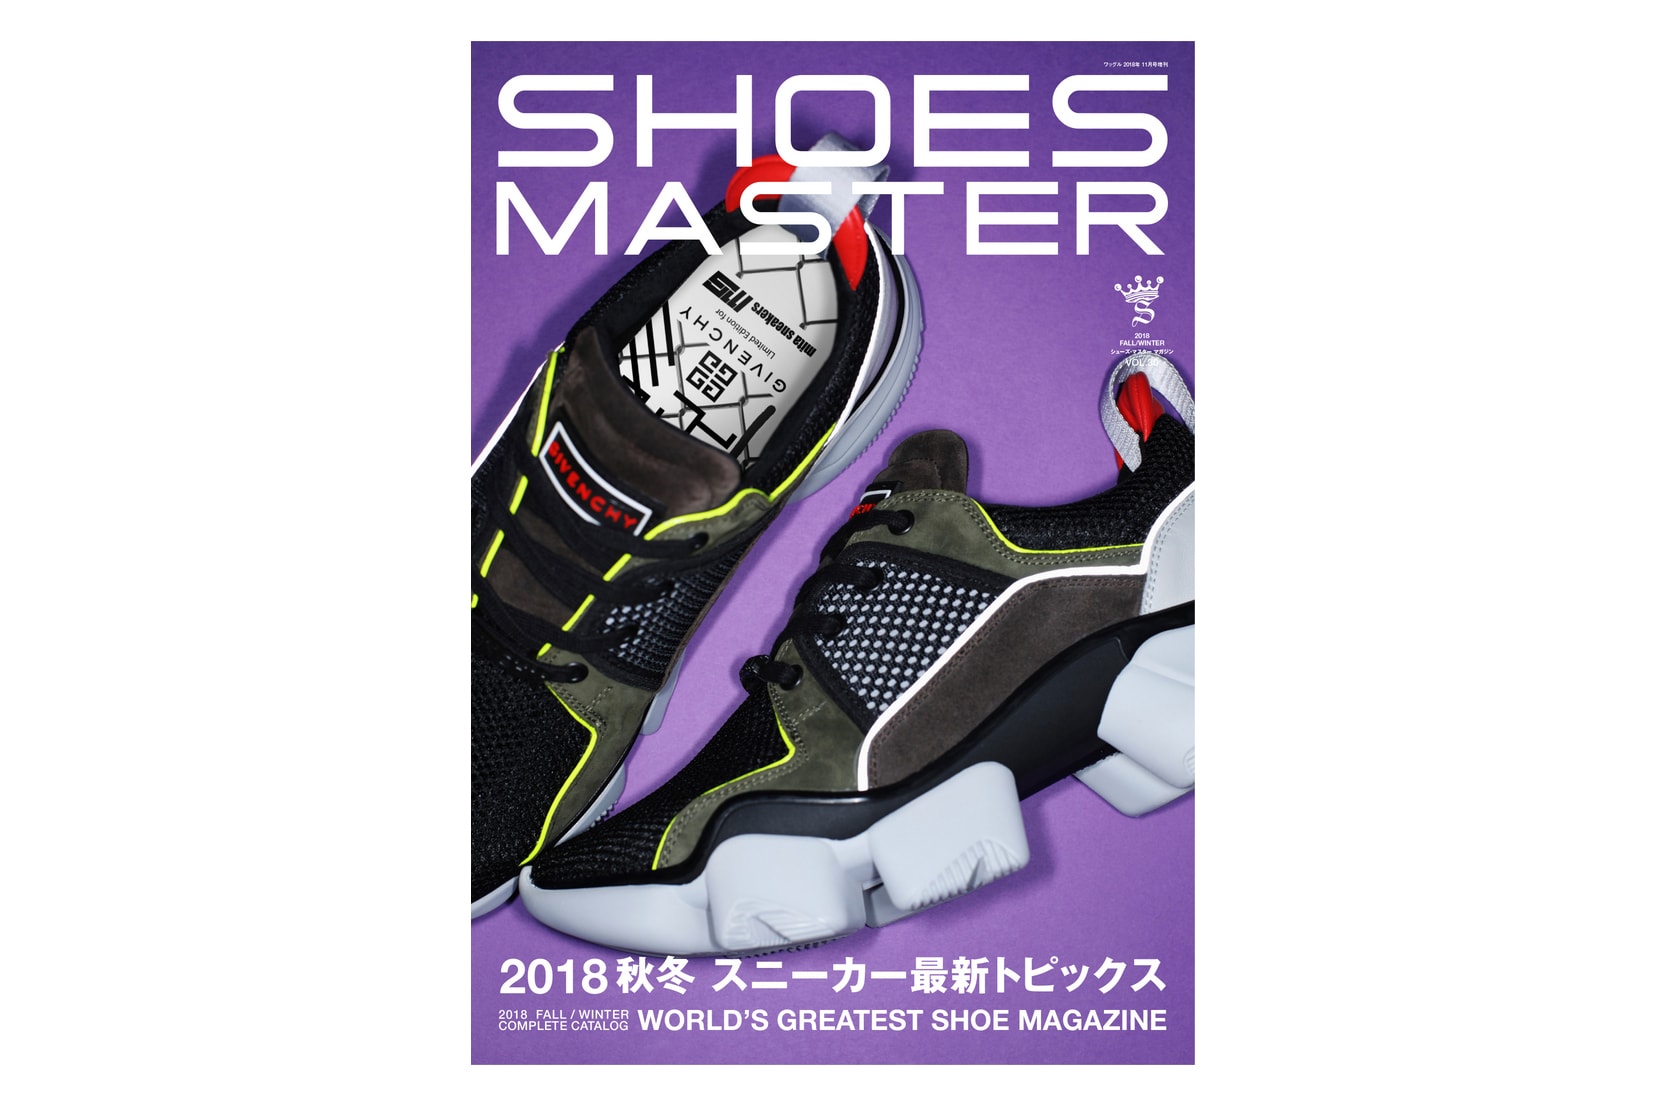 《SHOES MASTER》最新一期揭示 Givenchy x mita sneakers 全新聯名鞋款